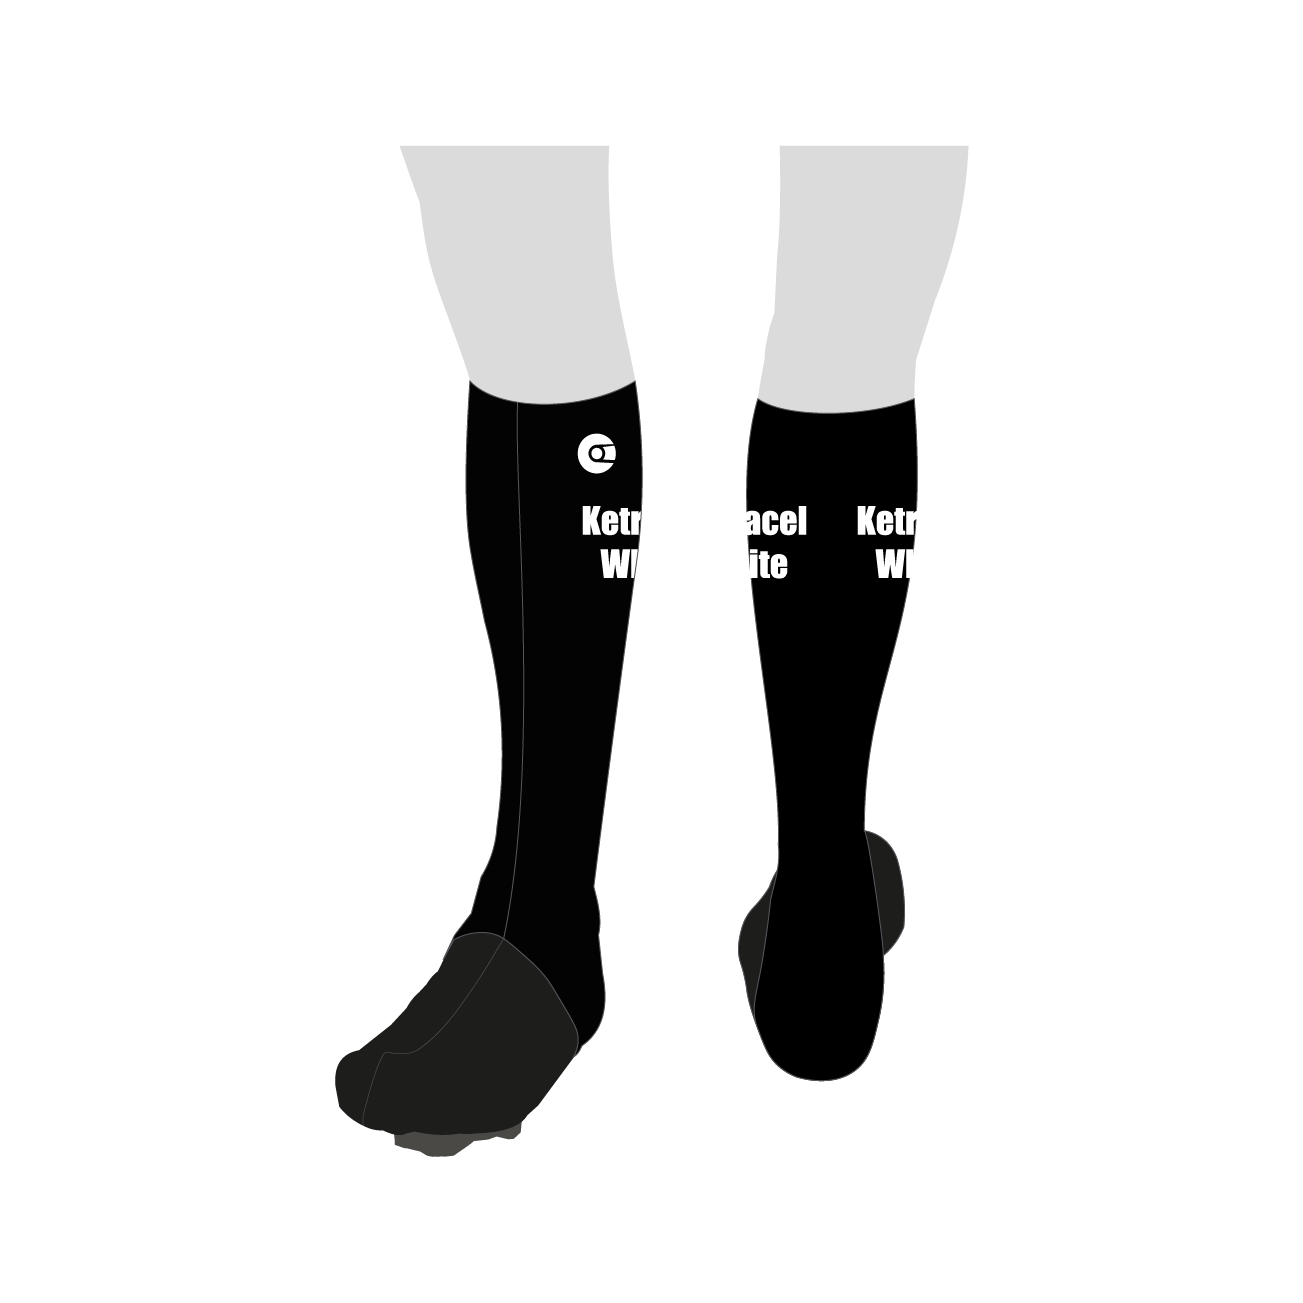 Hypersonic calf guards (45 ROAD CLUB)